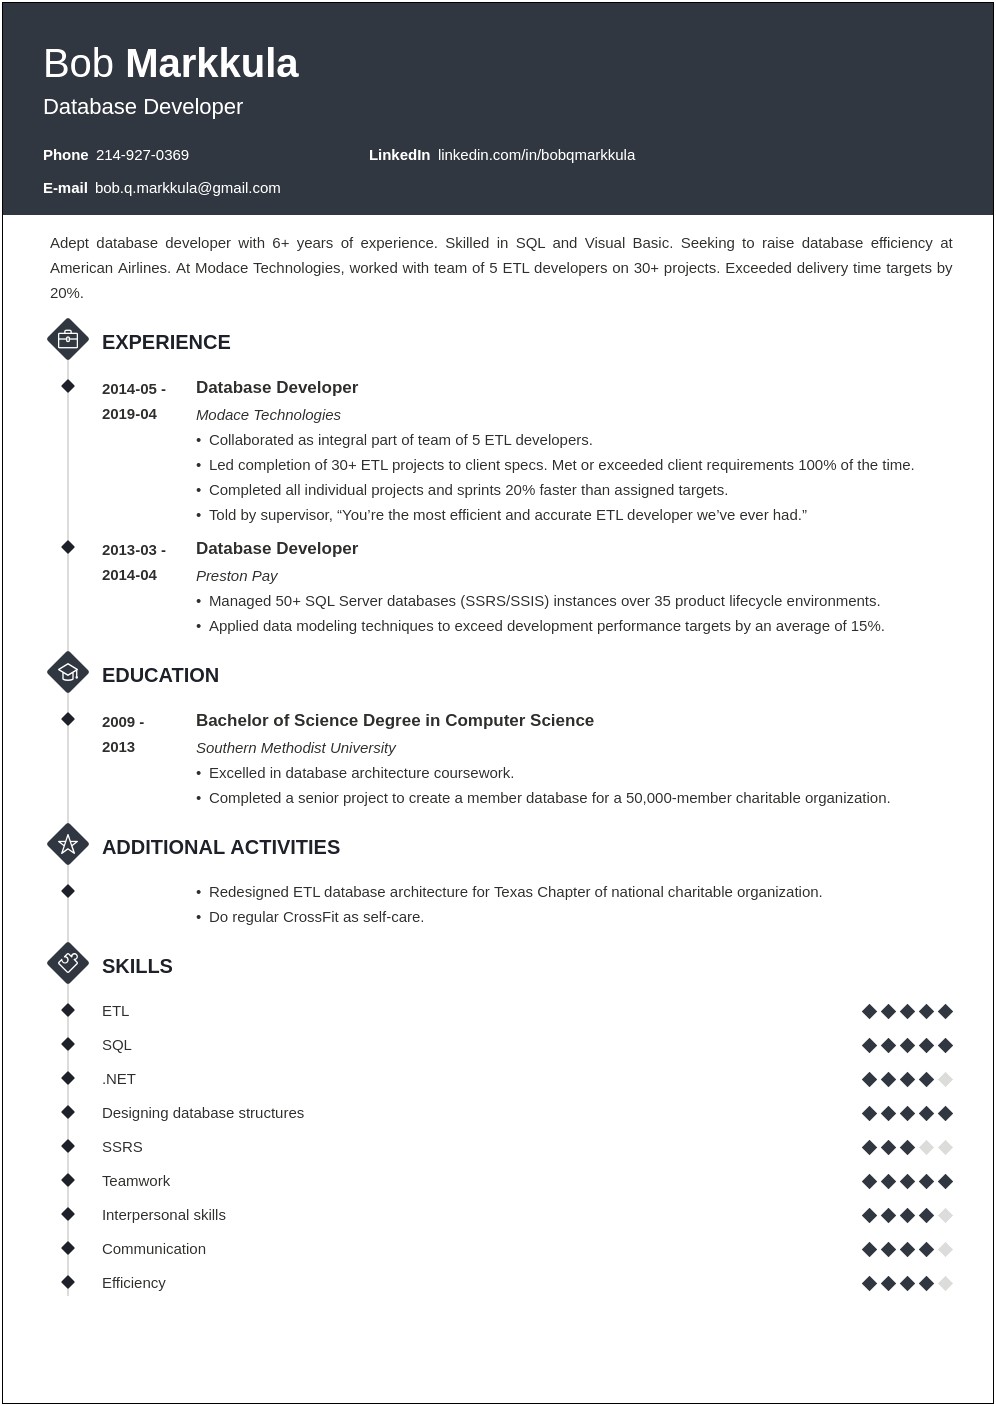 Adding Experience In Rdms In Resume